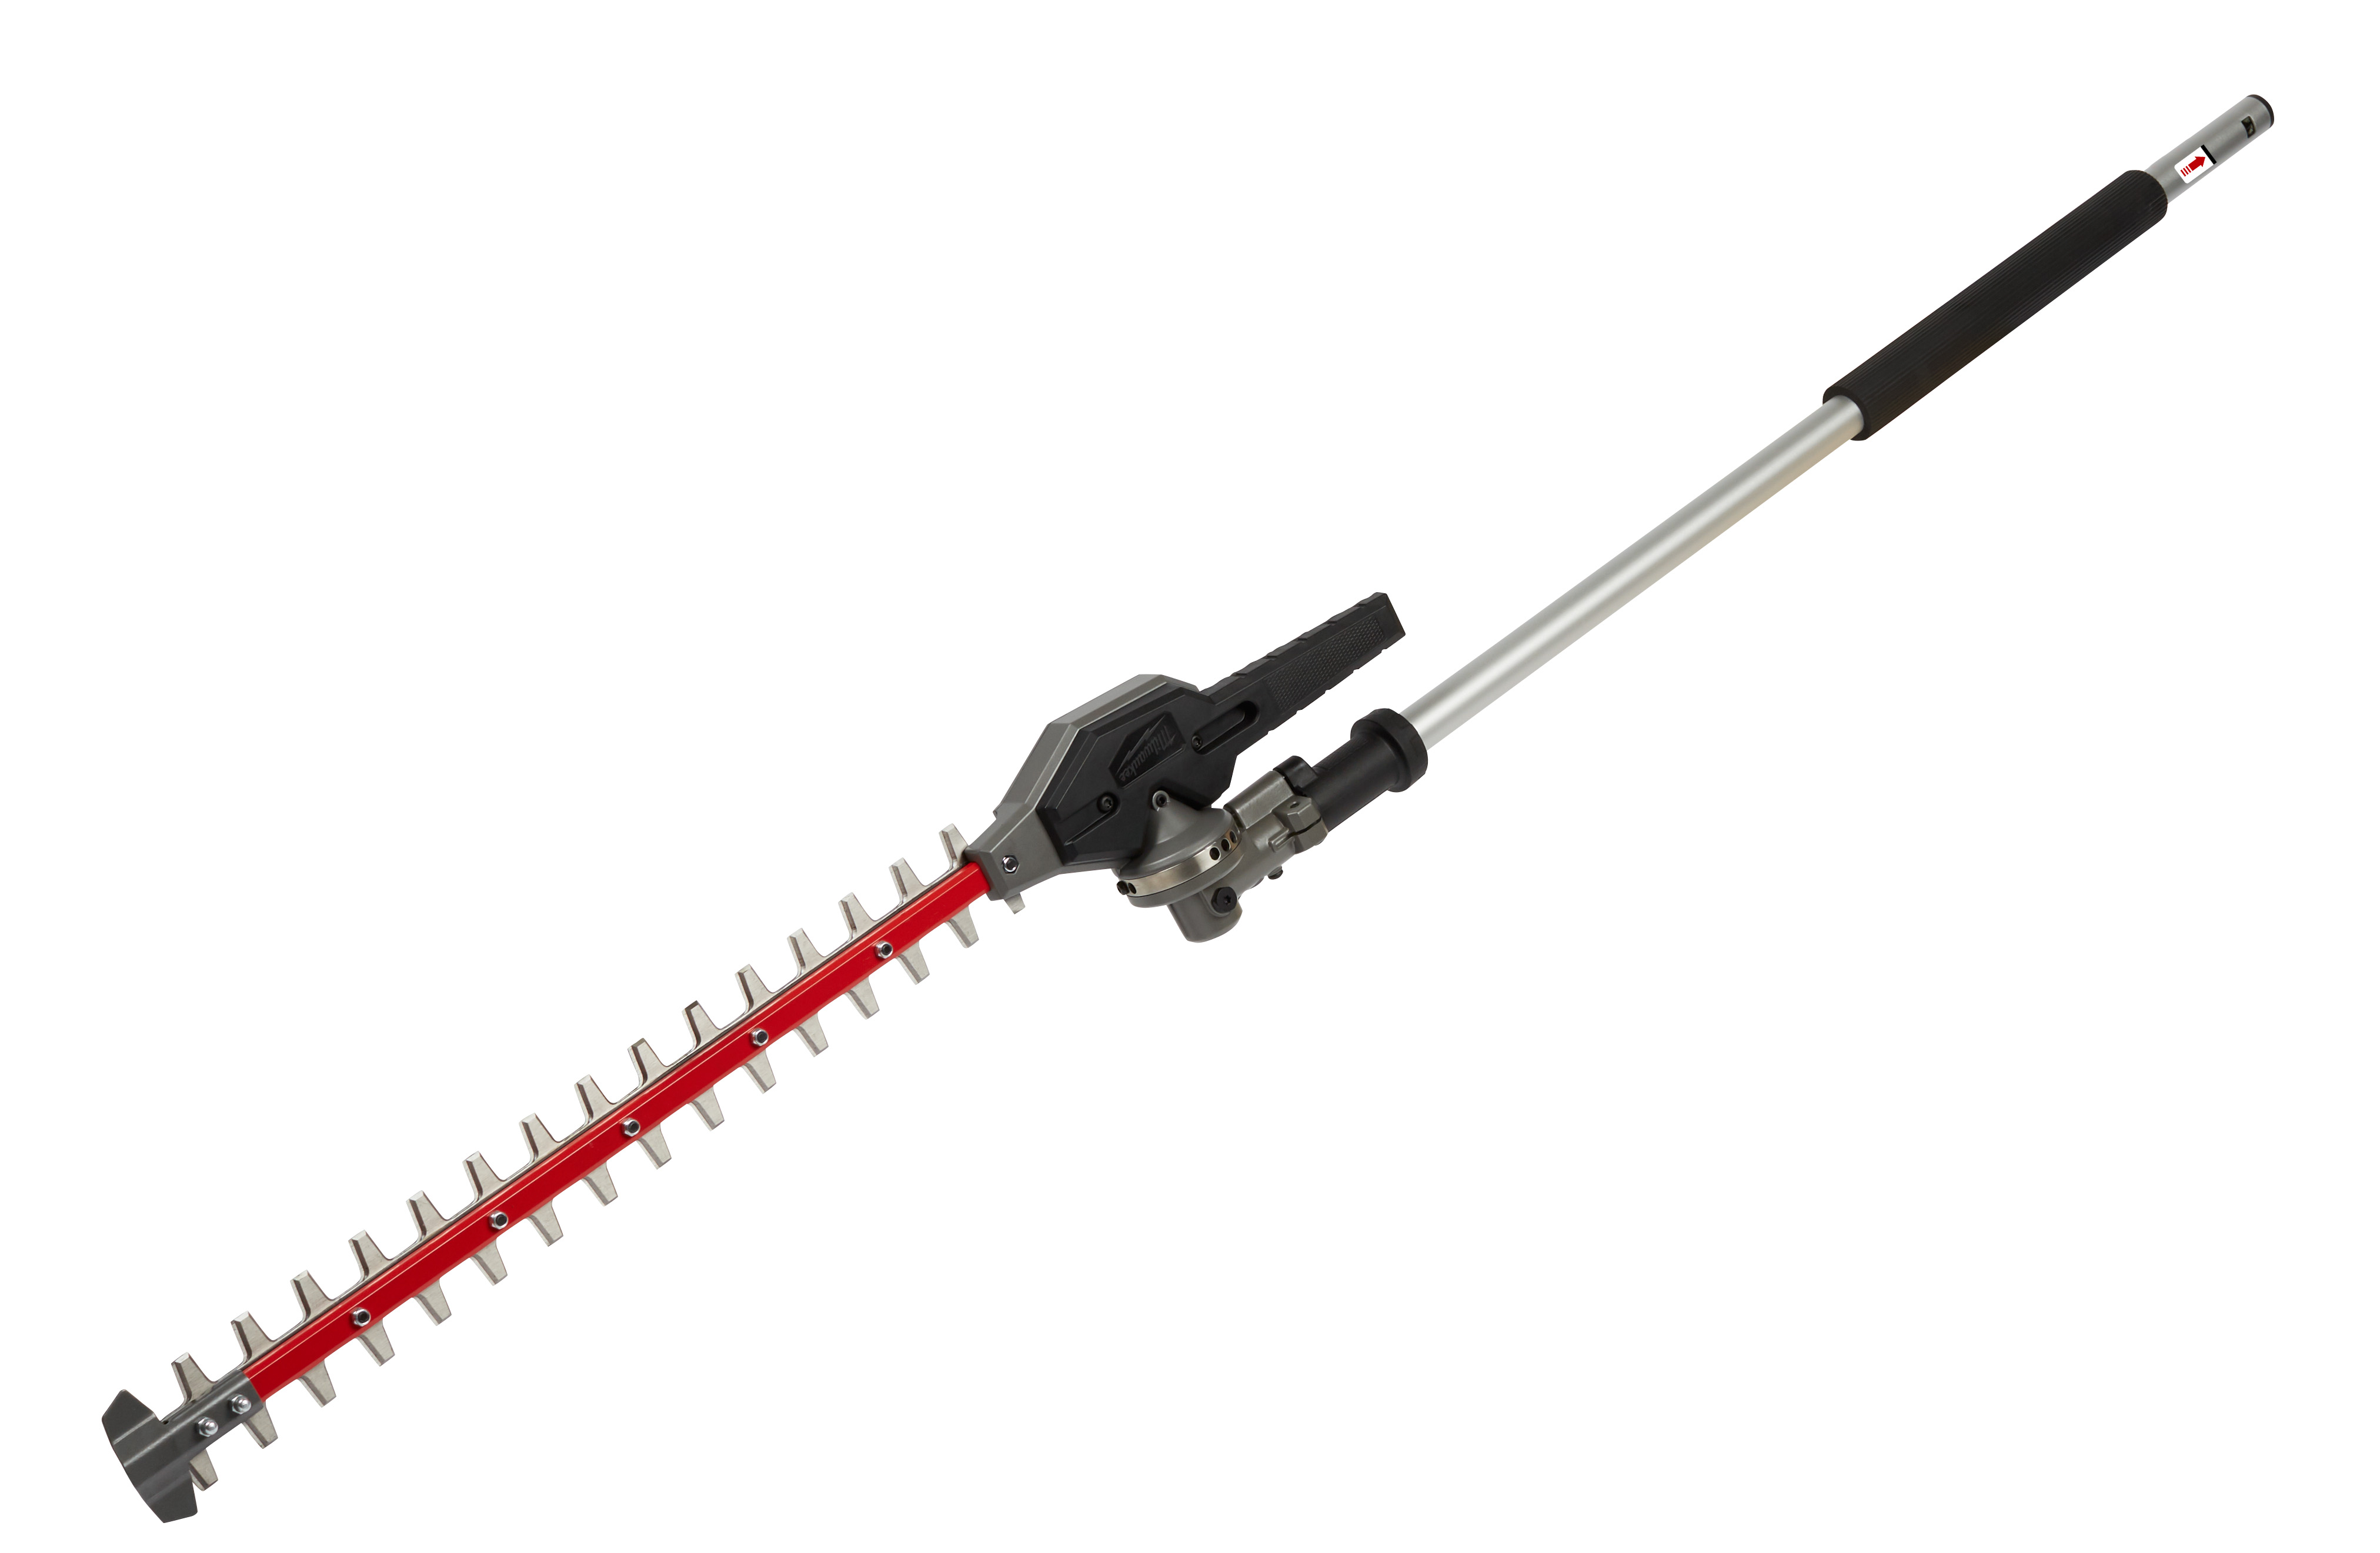 M18 FUEL Hedge Trimmer Attachment for Milwaukee QUIK-LOK Attachment System